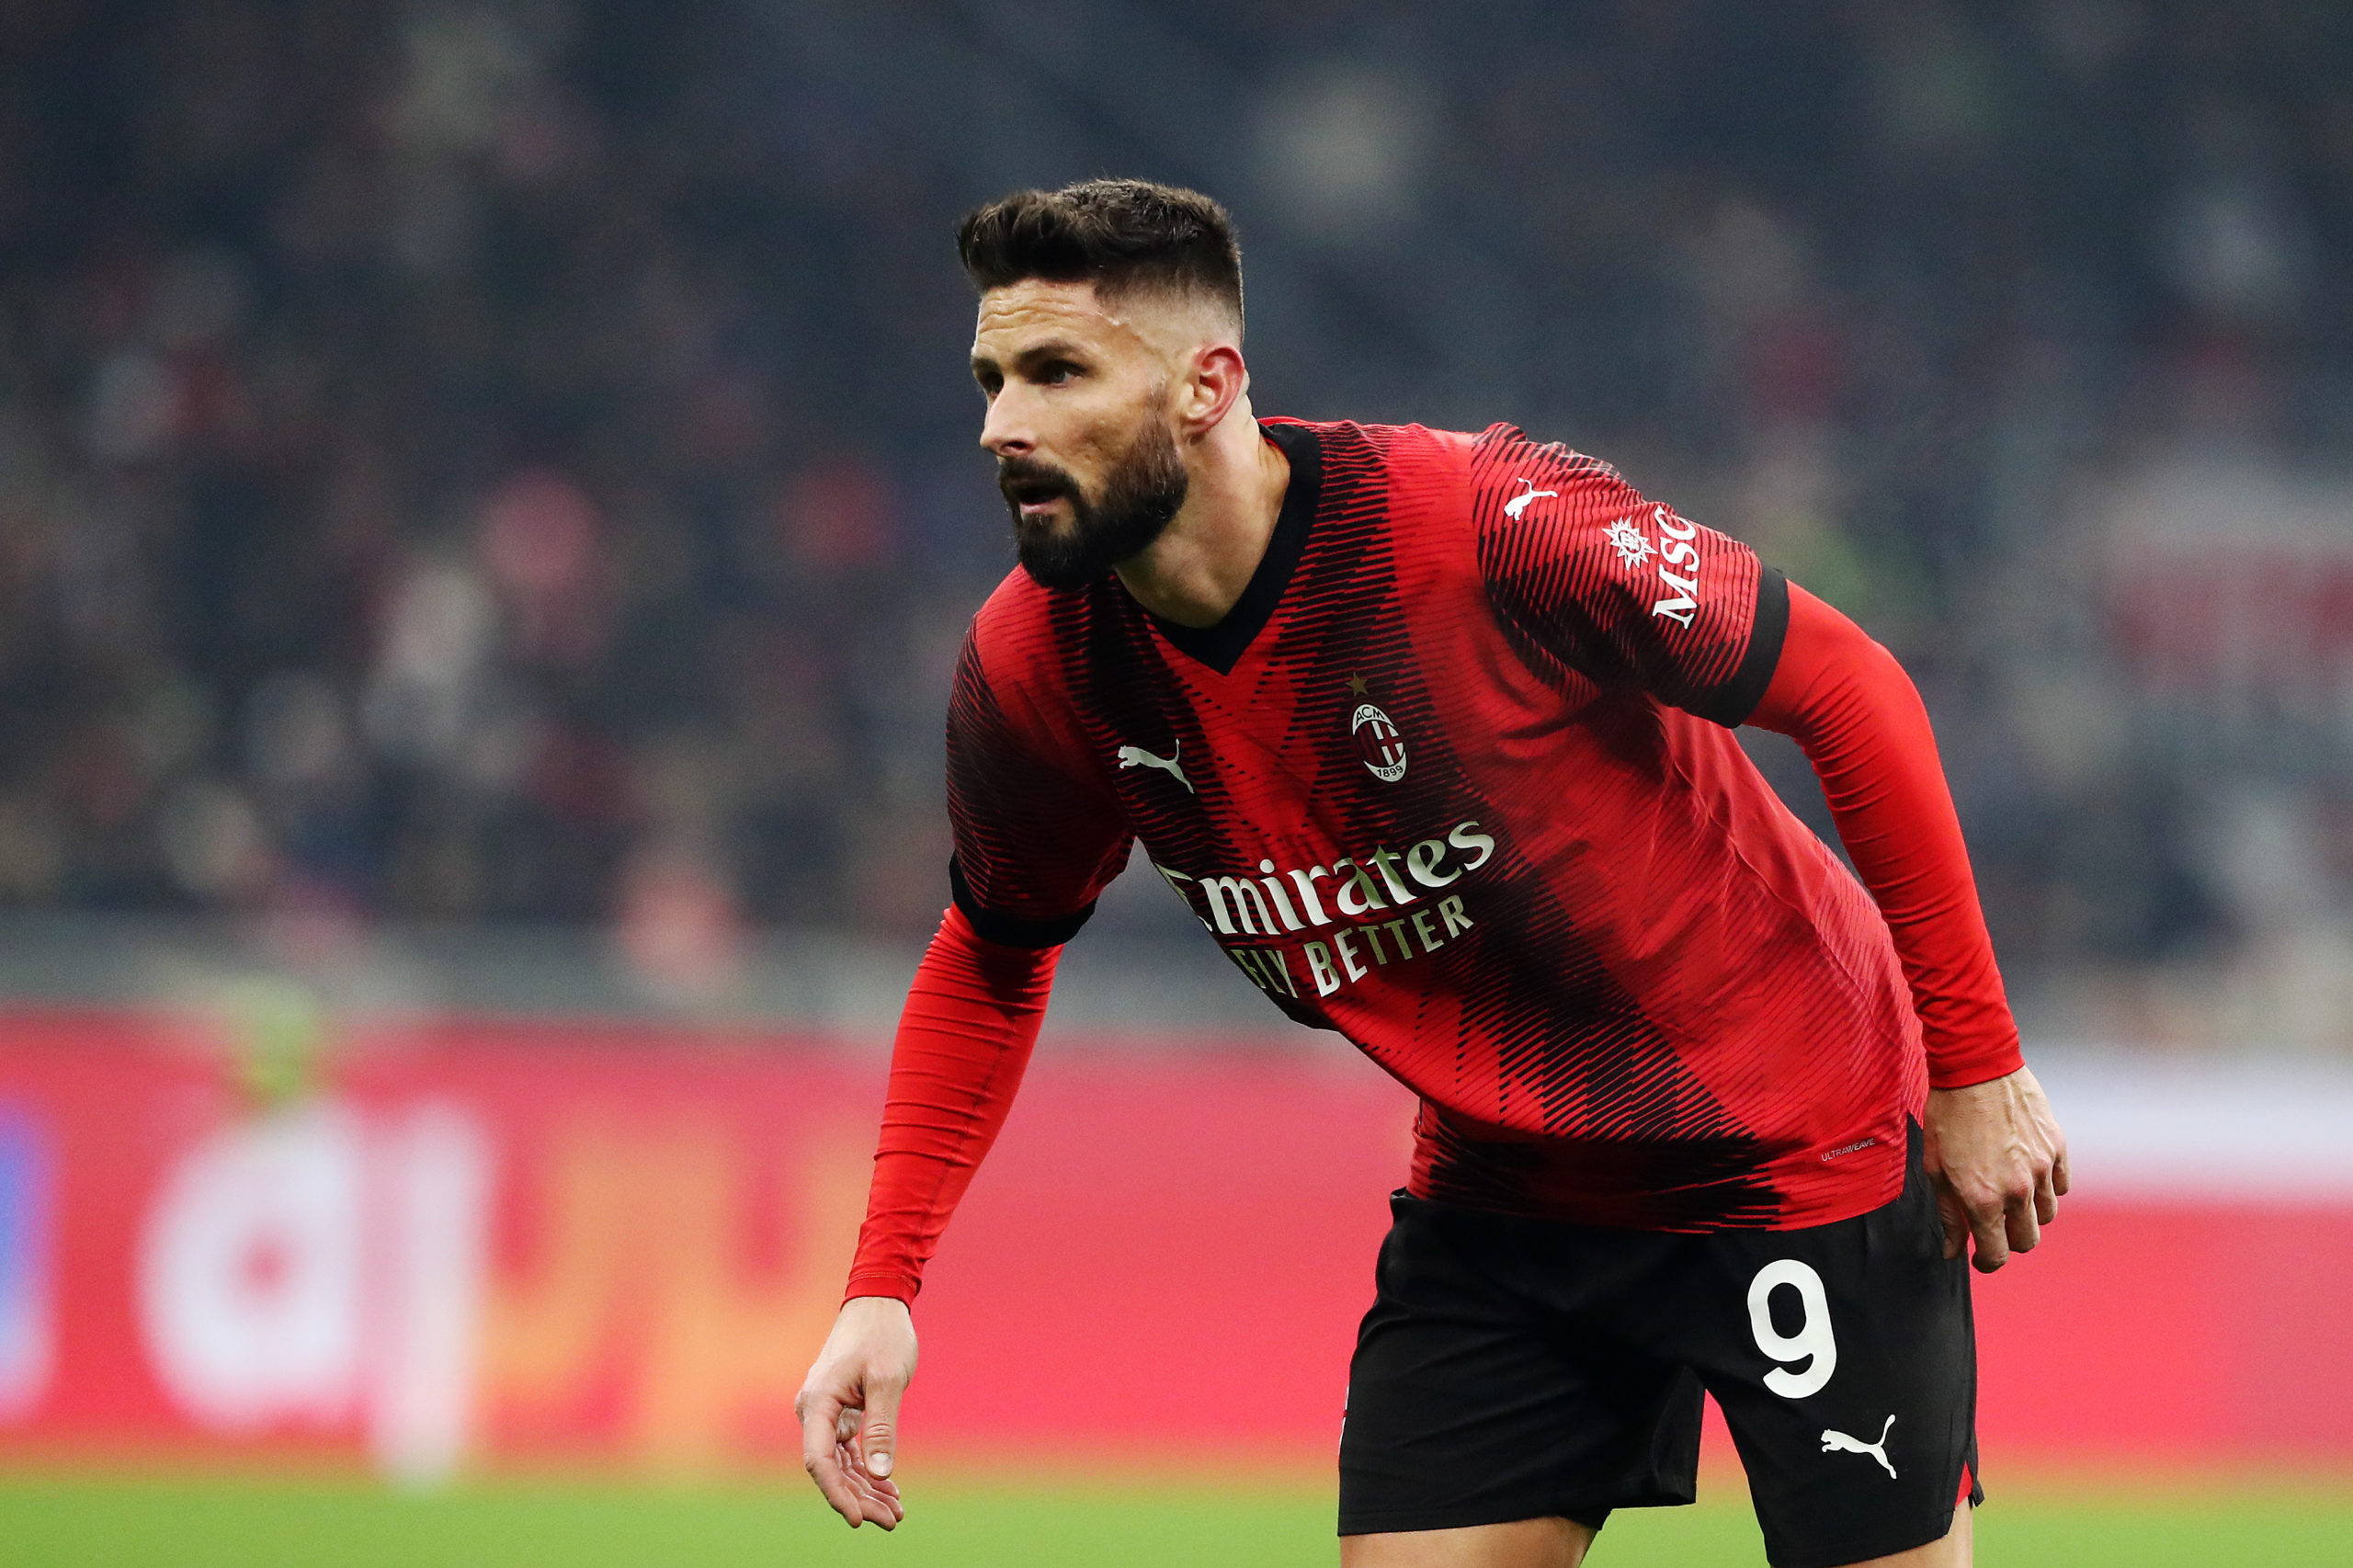 Olivier Giroud admitted a few weeks ago that he didn’t know yet whether he would stay at Milan, but he already excluded one possible landing spot.